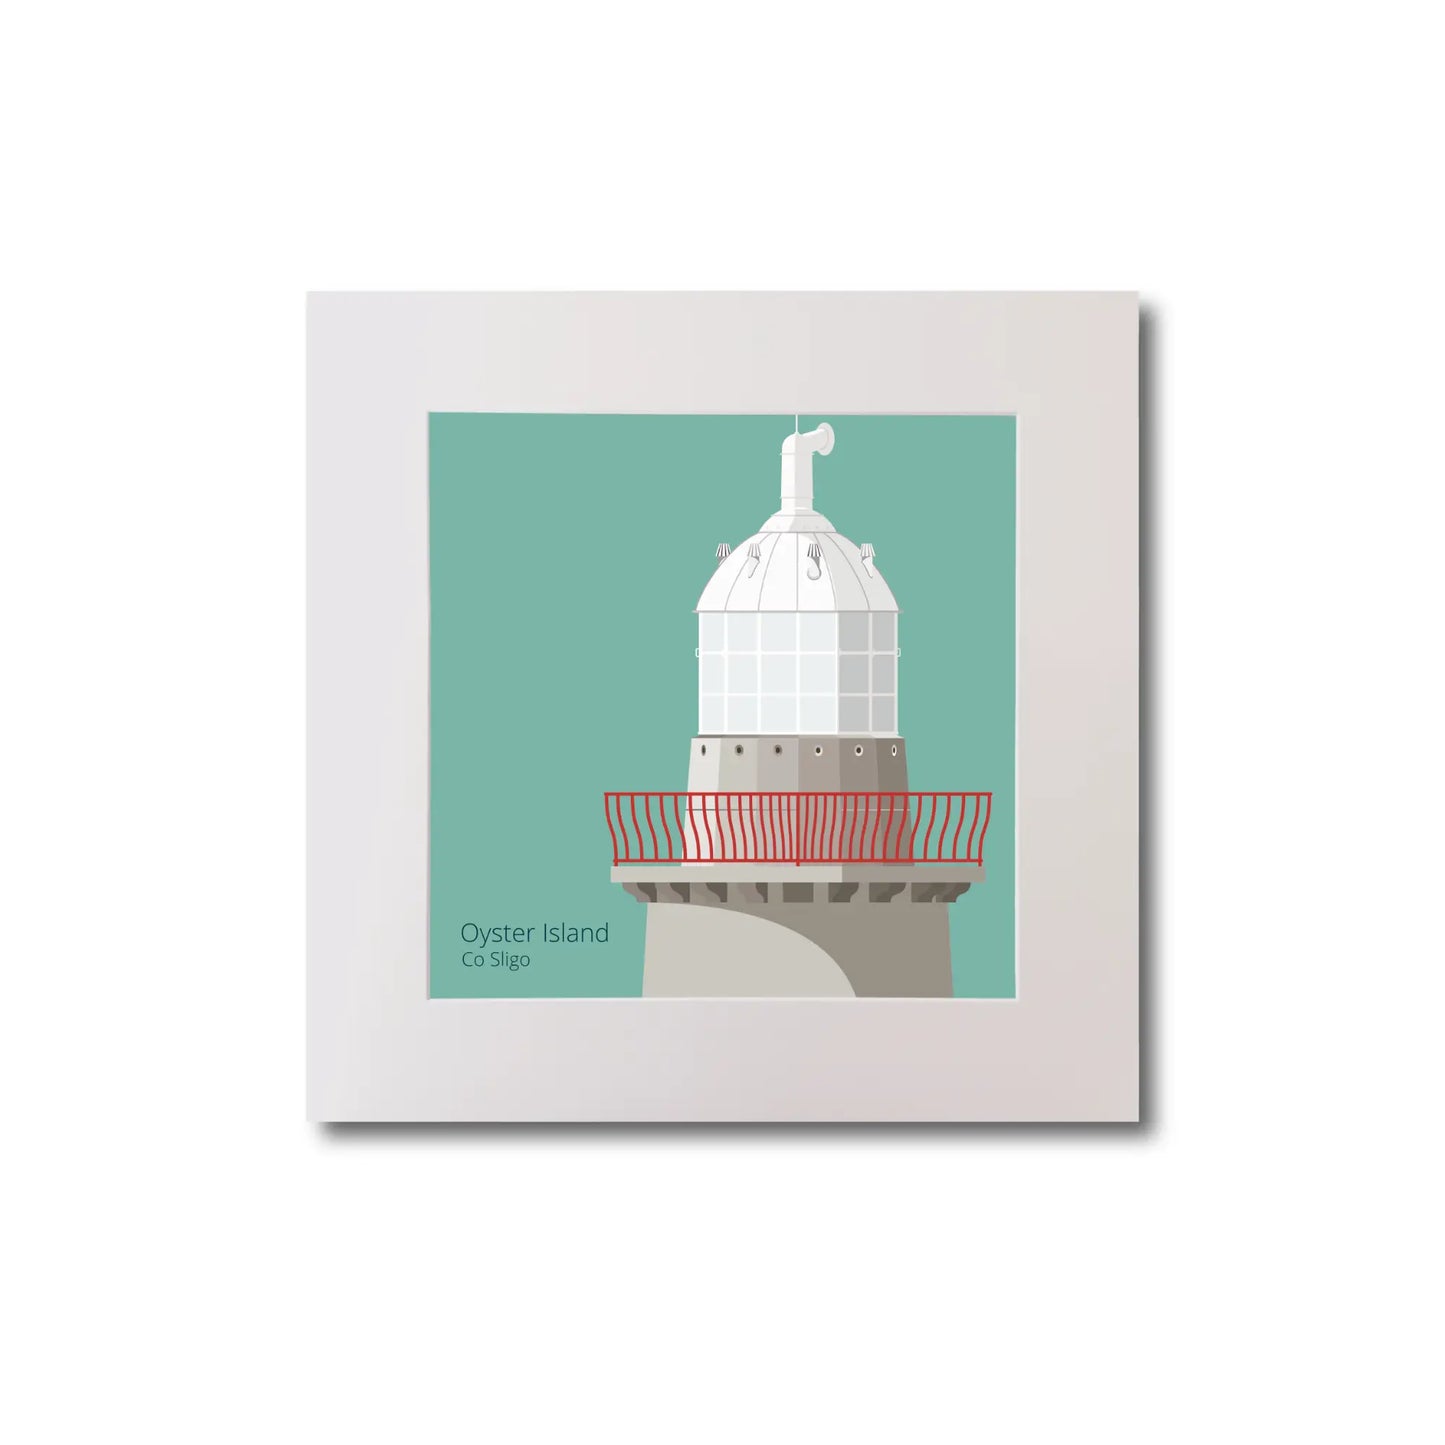 Illustration of Oyster Island lighthouse on an ocean green background, mounted and measuring 20x20cm.